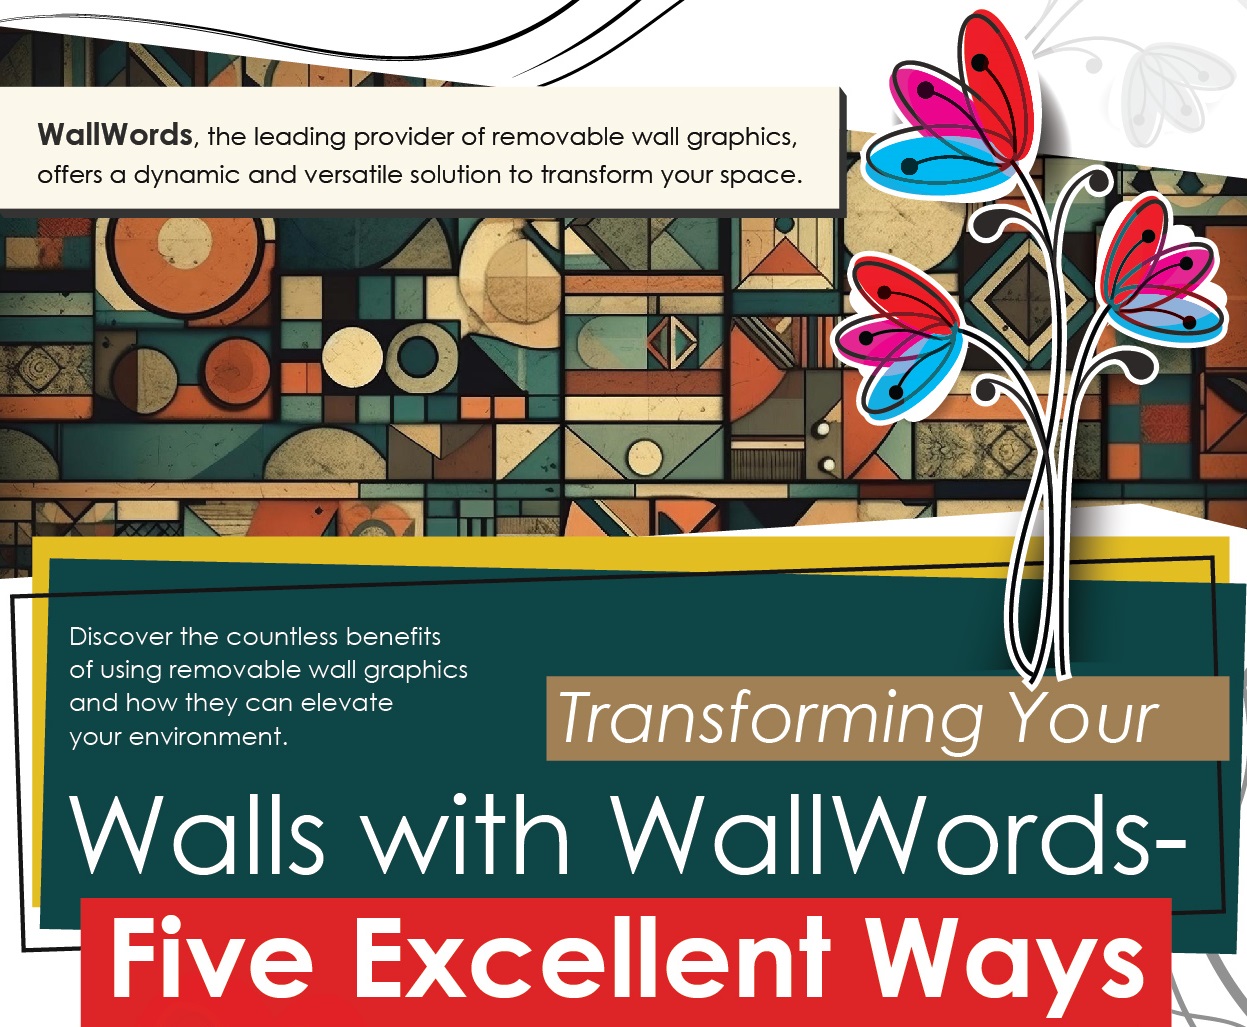 Walls With Wallwords- Five Excellent Ways